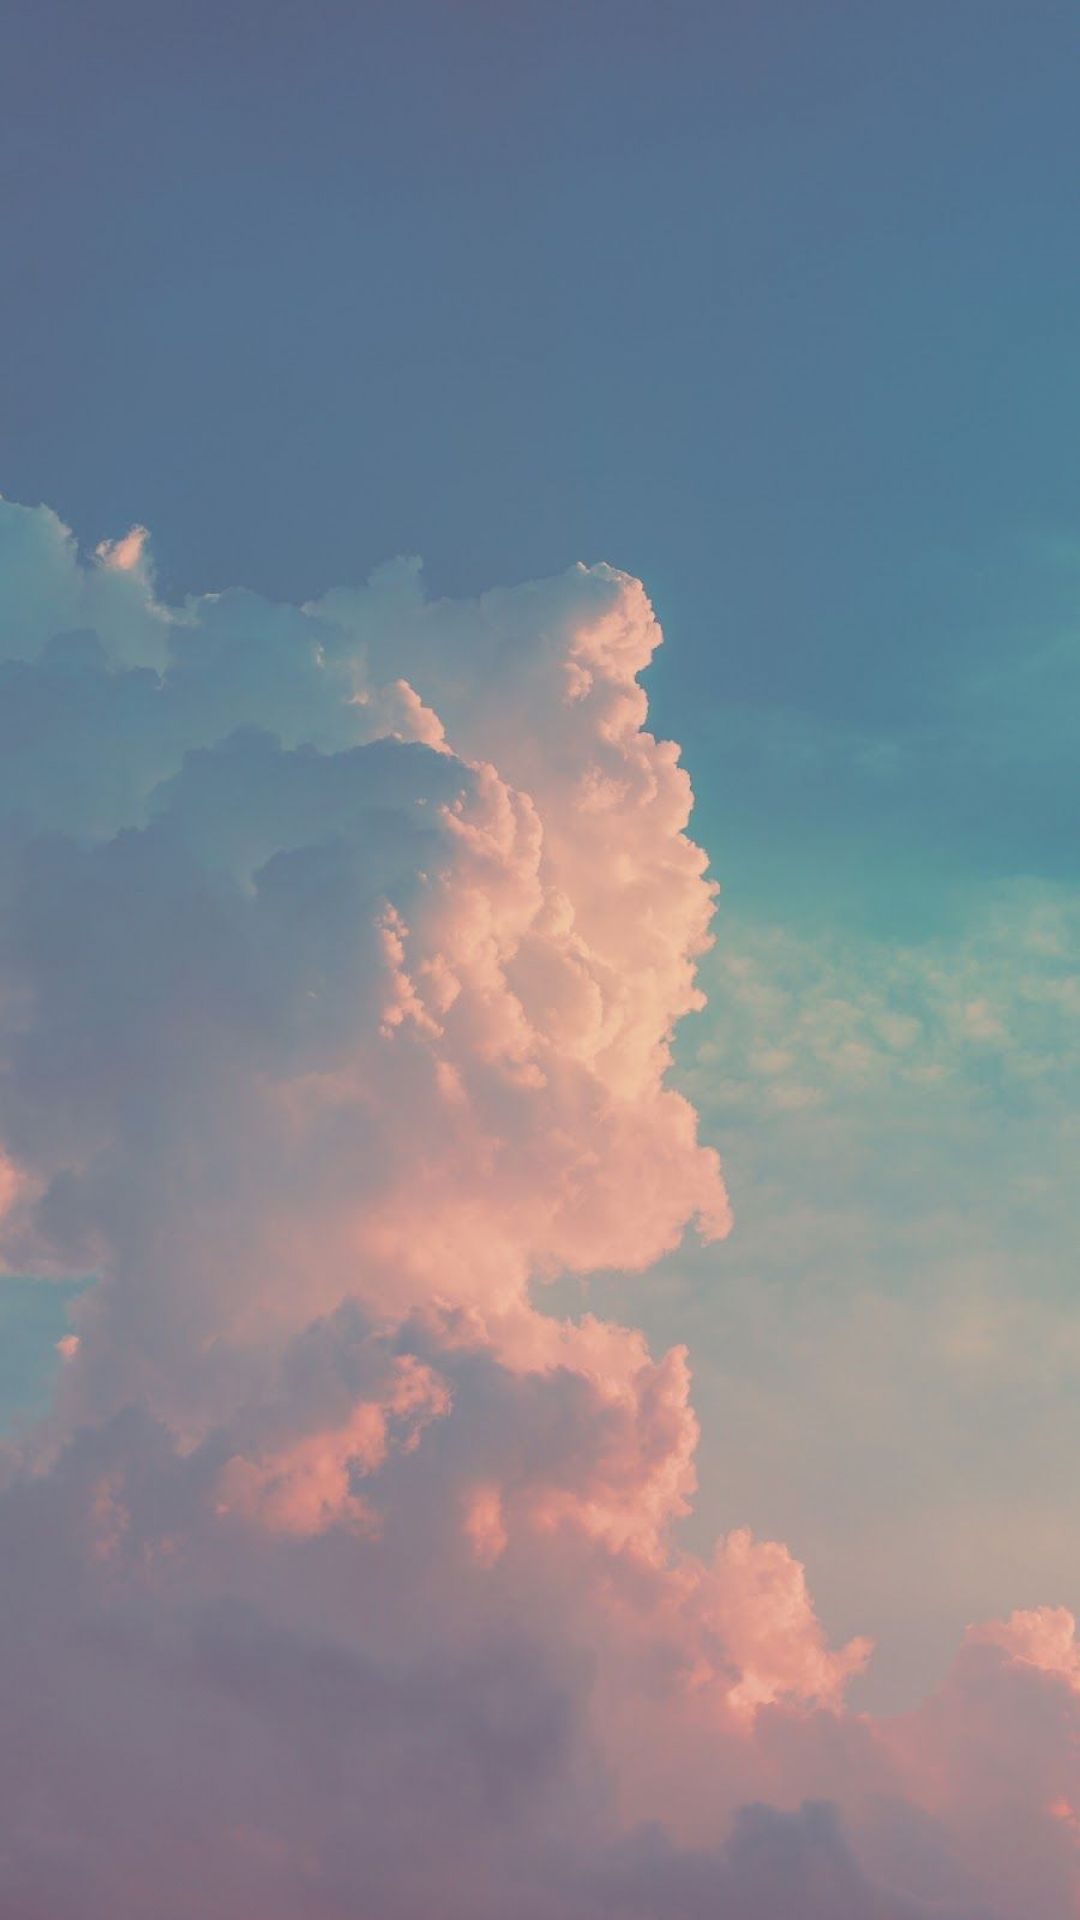 Clouds Aesthetic 2020 Wallpapers Wallpaper Cave